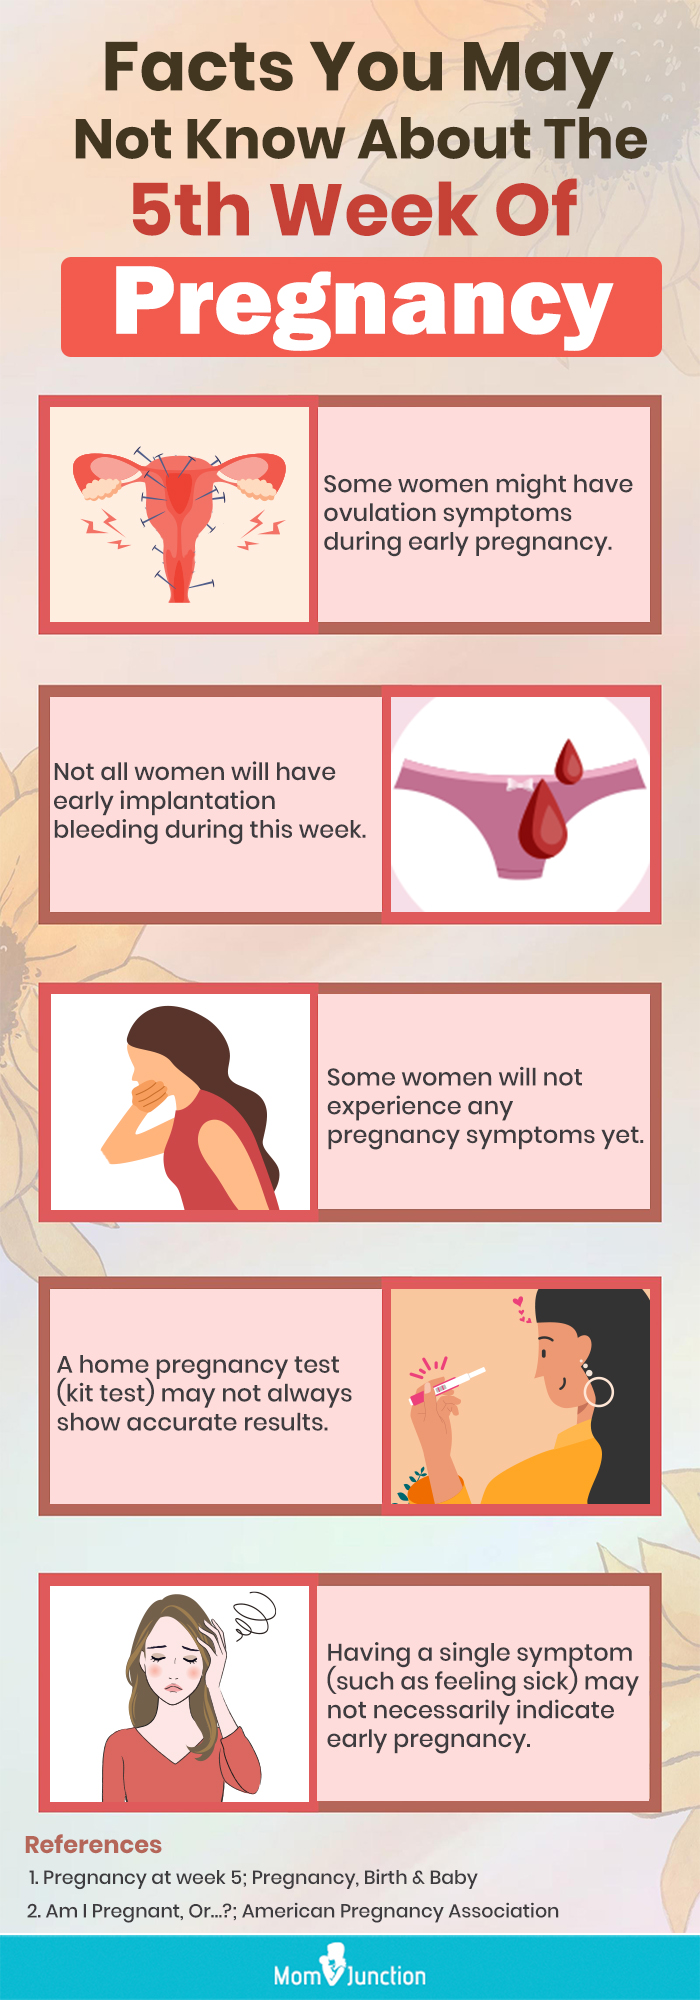 facts you may not know about the 5th week of pregnancy [infographic]